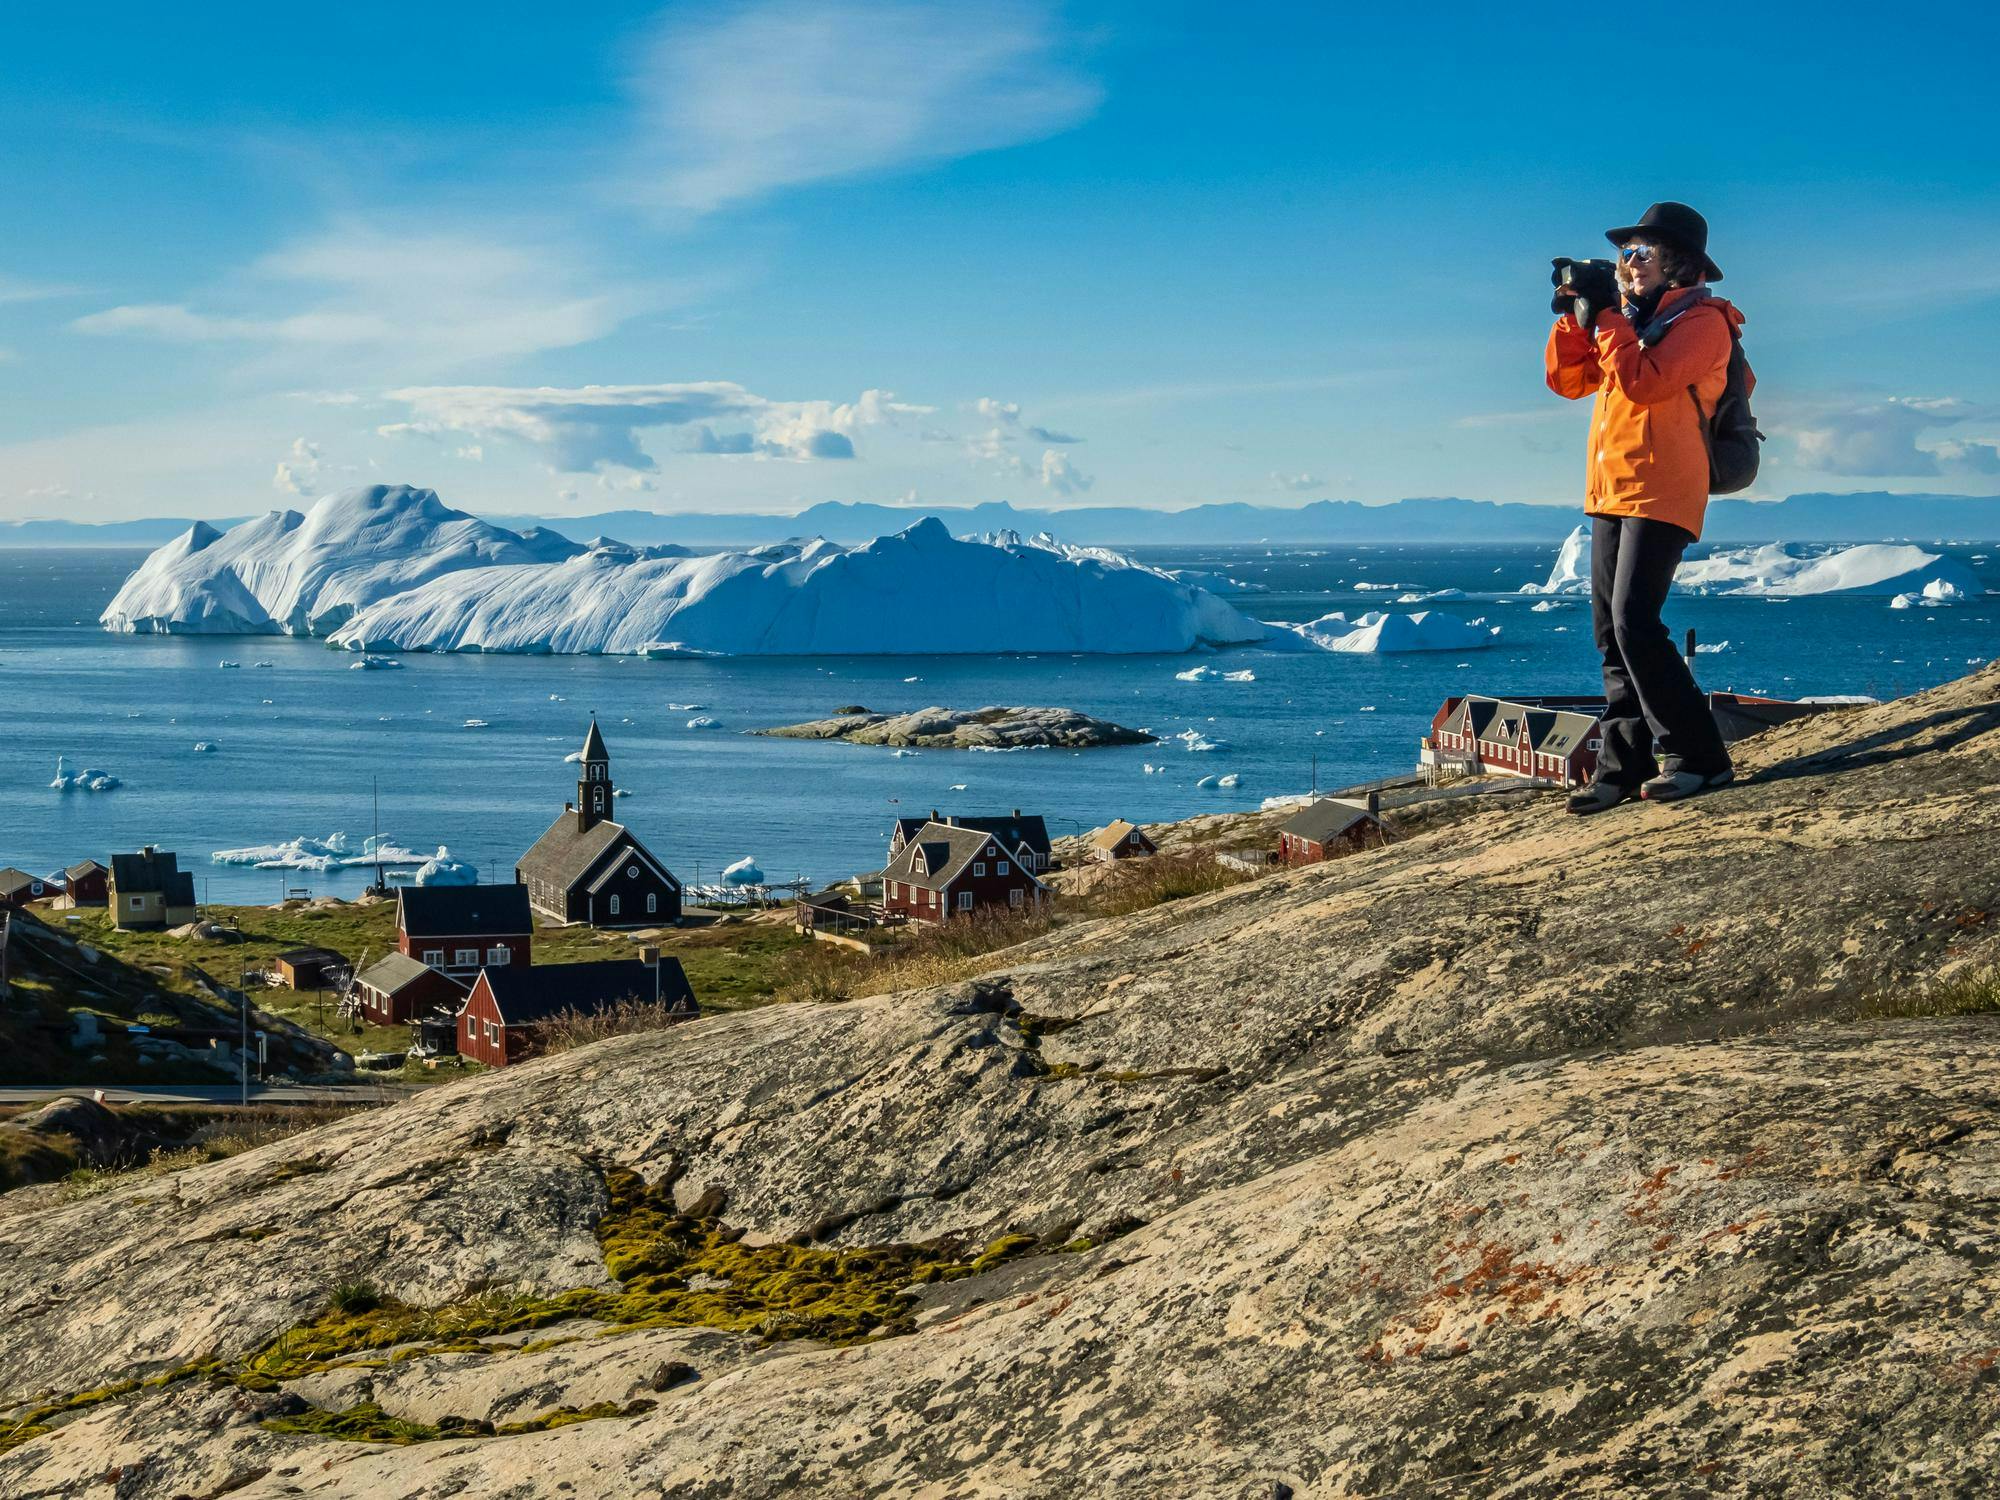 A guest photographs the view at the scenic viewpoint above the historic Zion Church, Ilulissat, Greenland